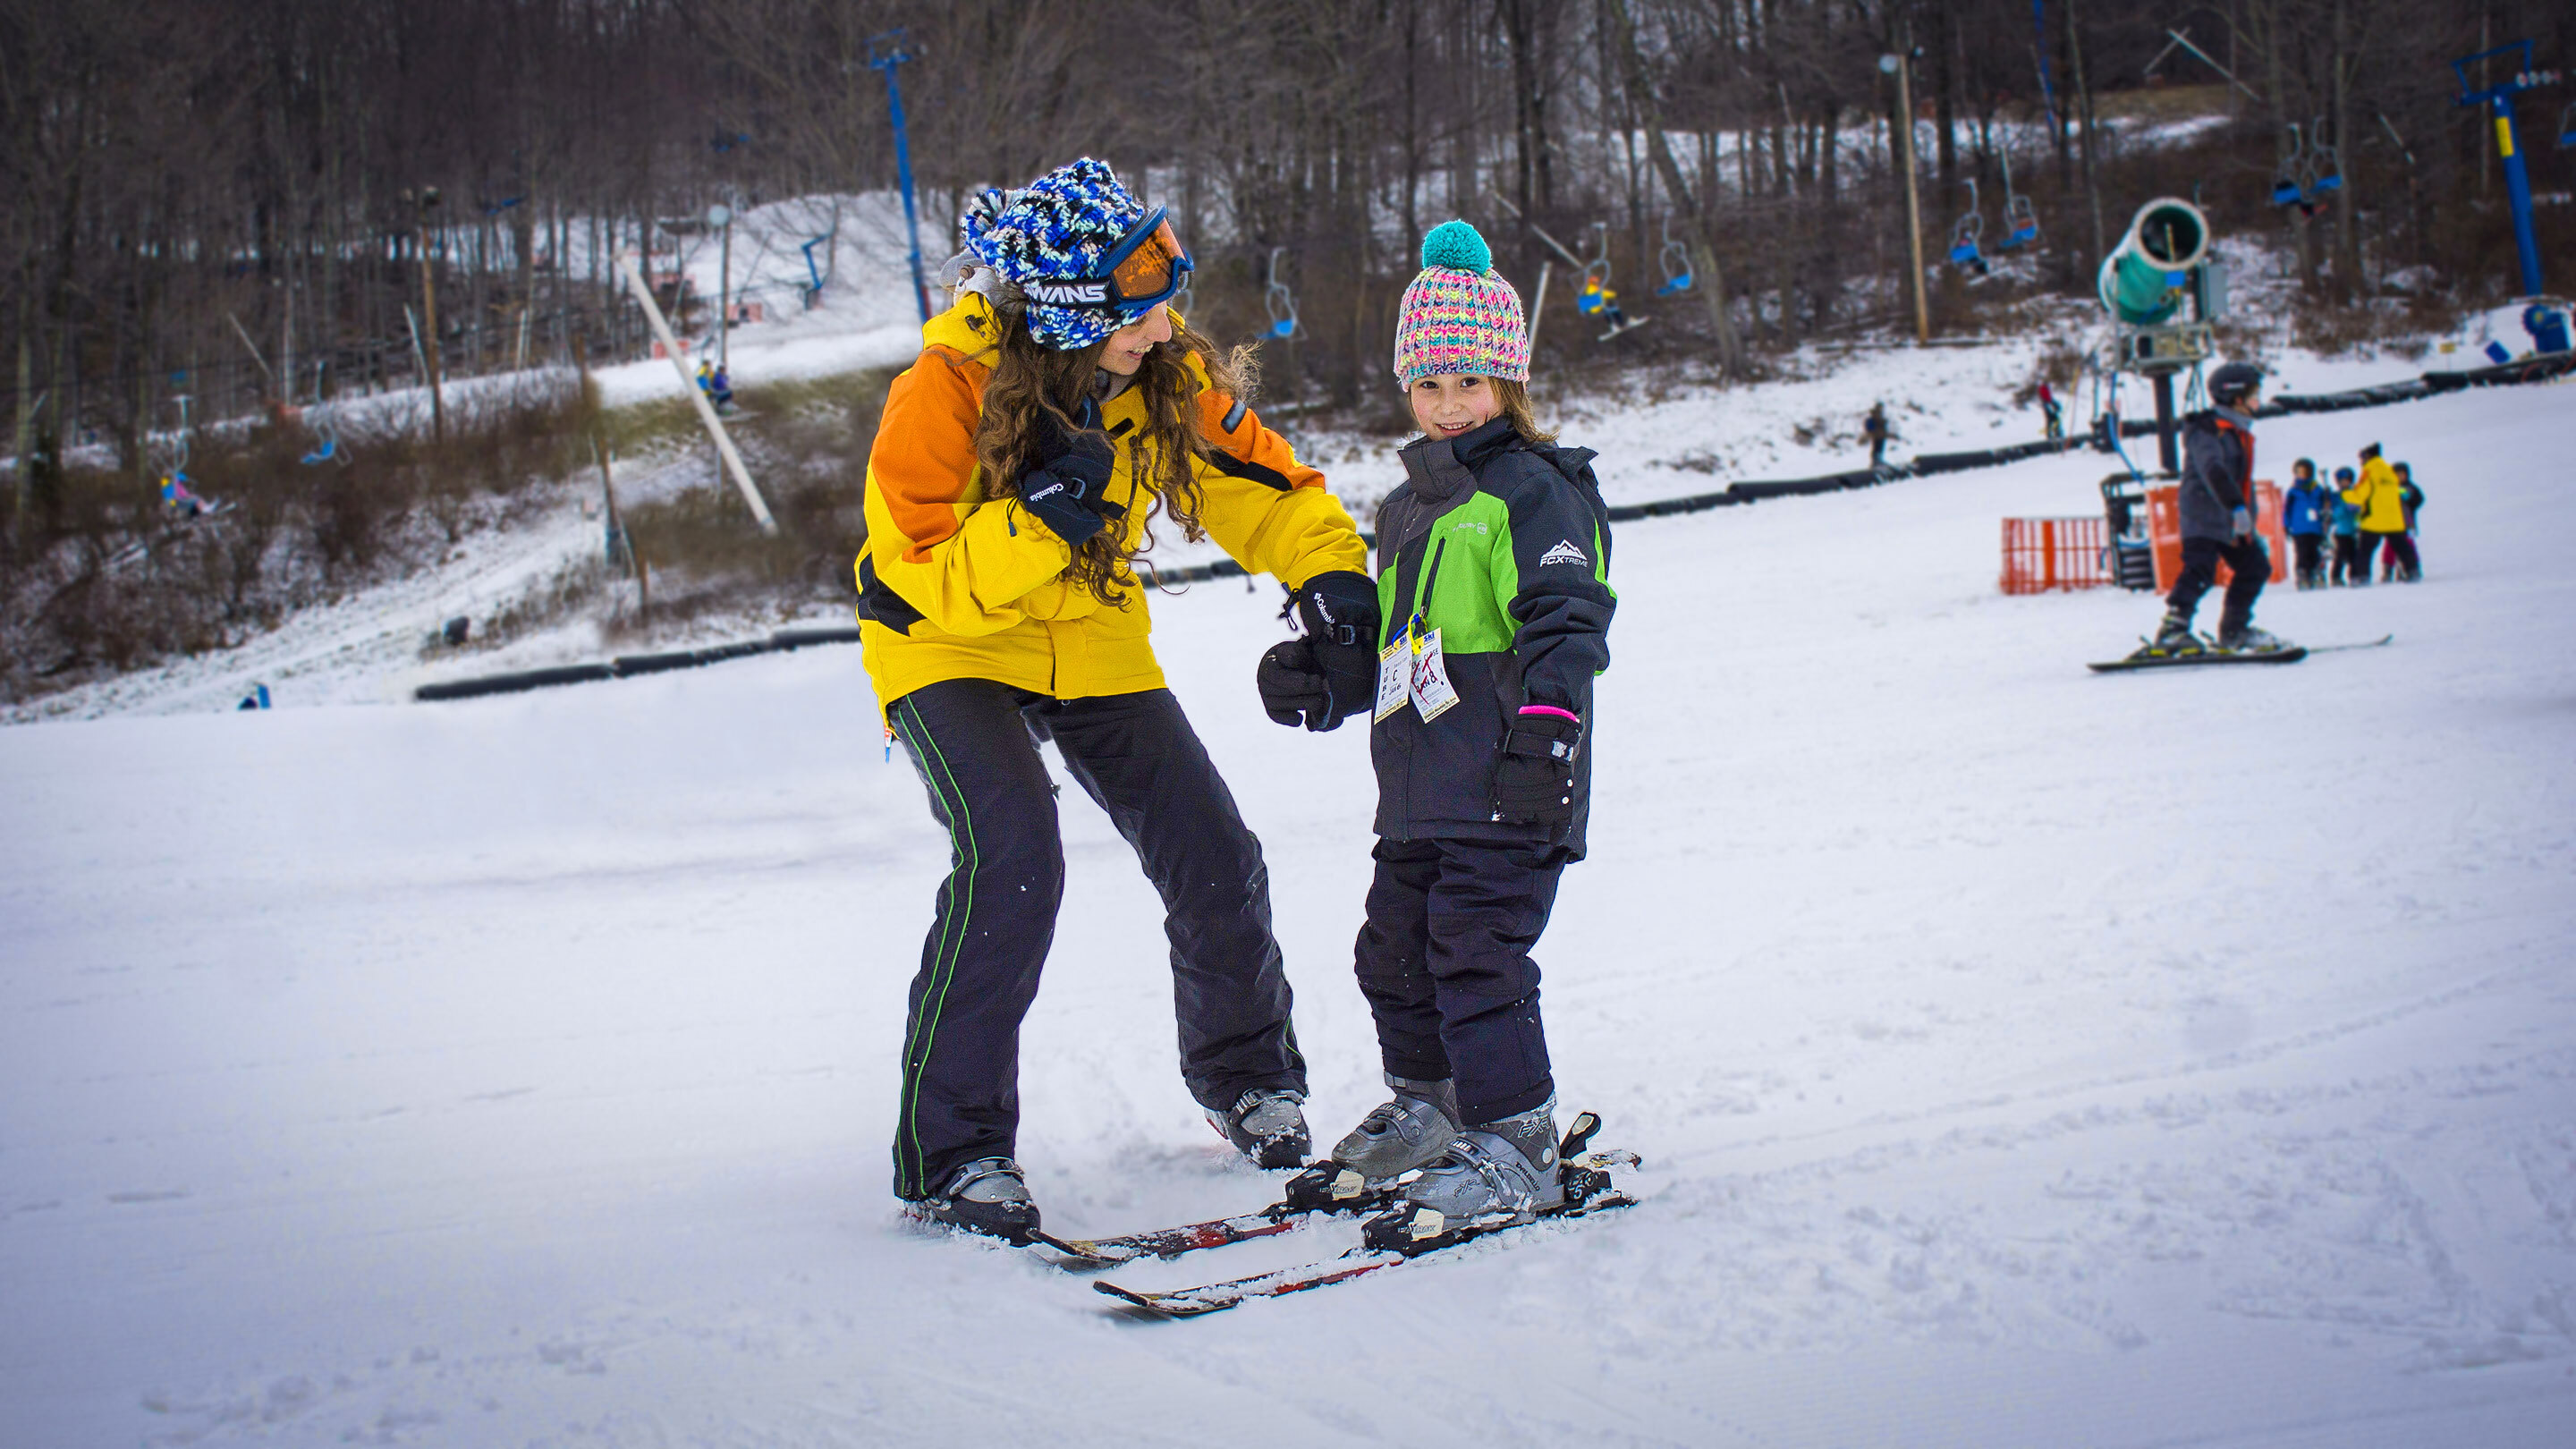 Cute Ski (or Snowboard) Gear That Is Also Practical & Warm - The Mom Edit